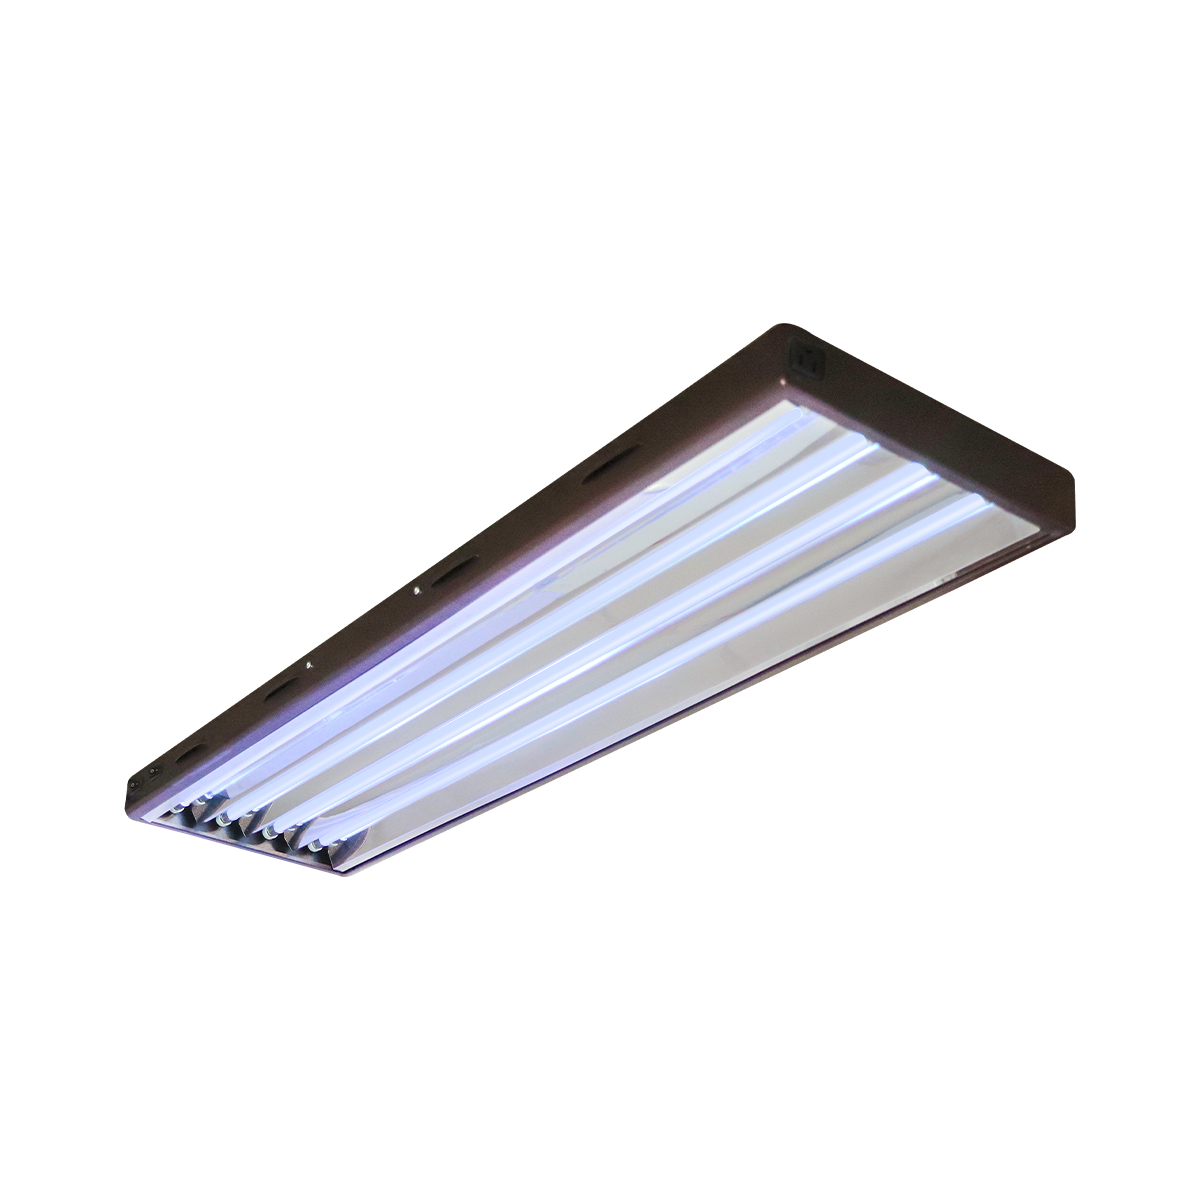 Ppe Disinfectant Fixture Angled Lit (2)